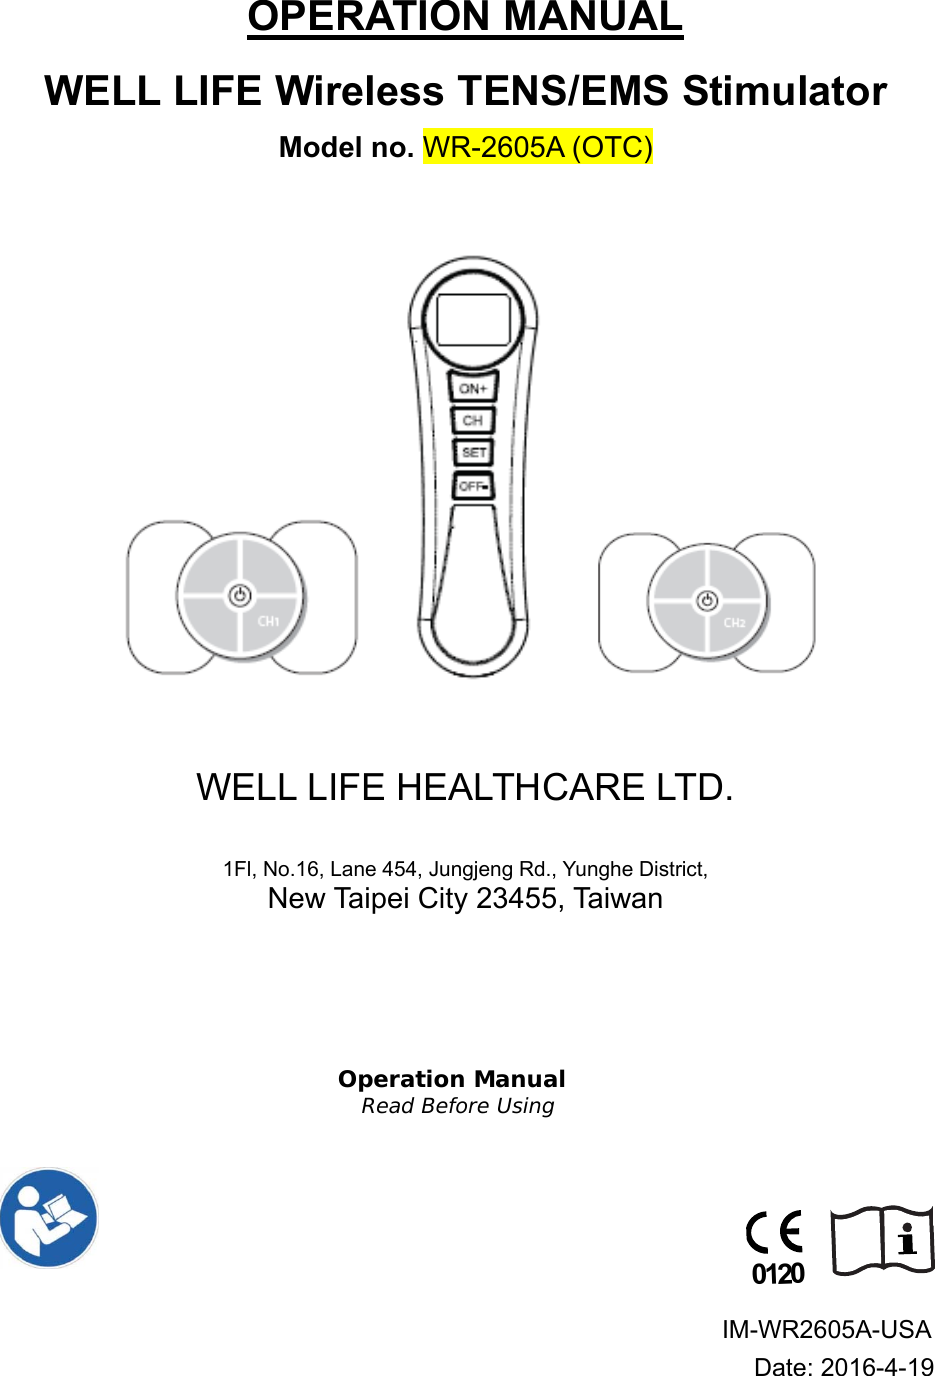 OPERATION MANUAL WELL LIFE Wireless TENS/EMS Stimulator  Model no. WR-2605A (OTC)                                                   WELL LIFE HEALTHCARE LTD.  1Fl, No.16, Lane 454, Jungjeng Rd., Yunghe District,  New Taipei City 23455, Taiwan    Operation Manual Read Before Using                                                                                                                                           IM-WR2605A-USA    Date: 2016-4-19 0120